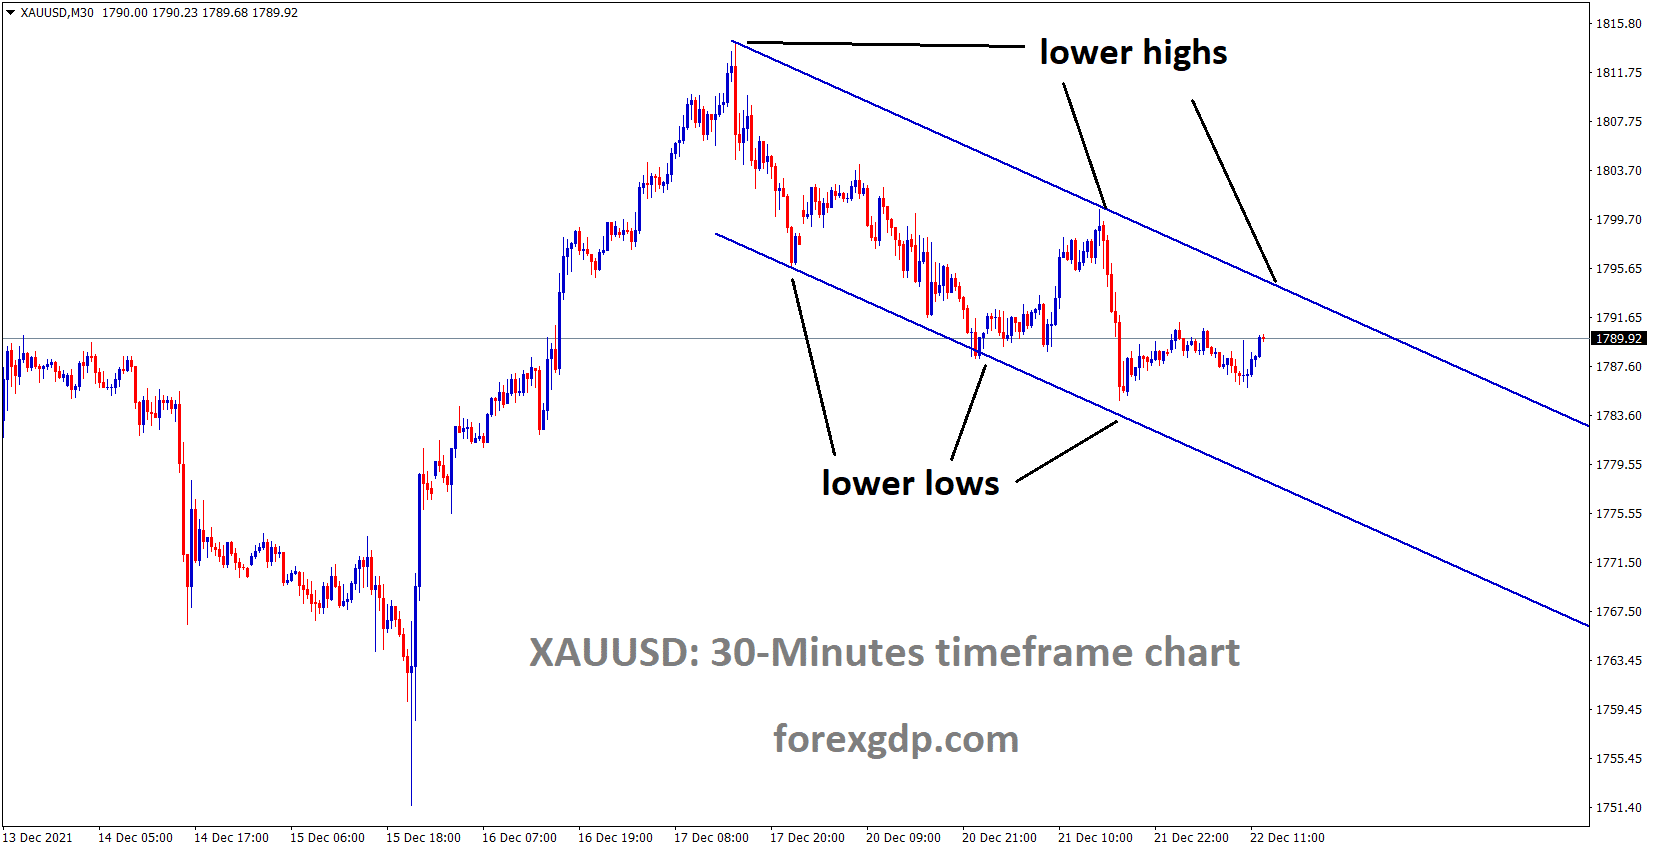 XAUUSD Gold price is moving in the Descending channel and the market has rebounded from the lower low area of the channel.